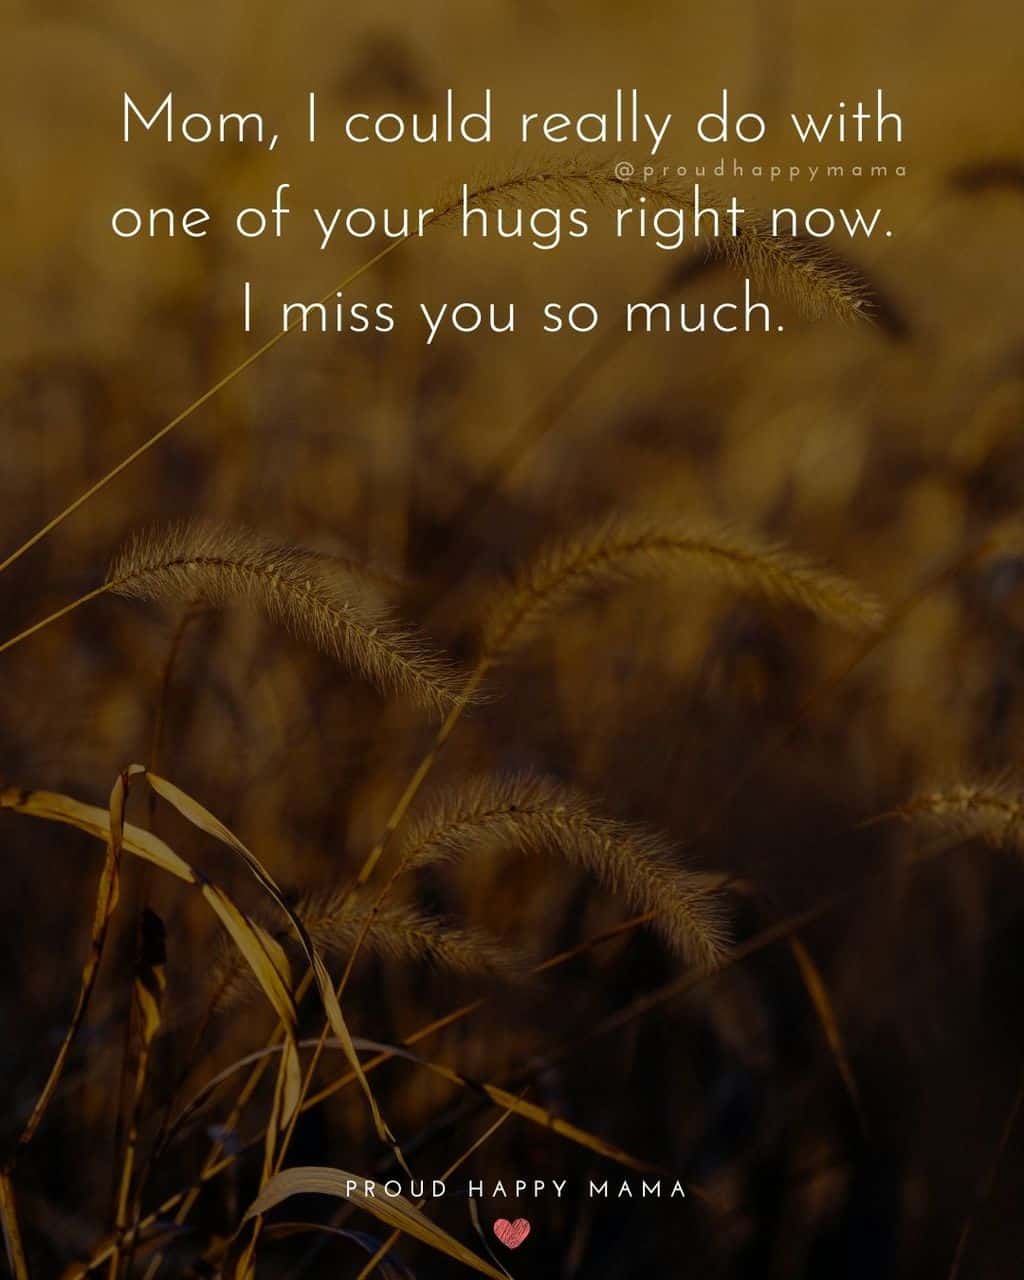 Wheat with yellow filter and text overlay, ‘Mom, I could really do with one of your hugs right now. I miss you so much.’